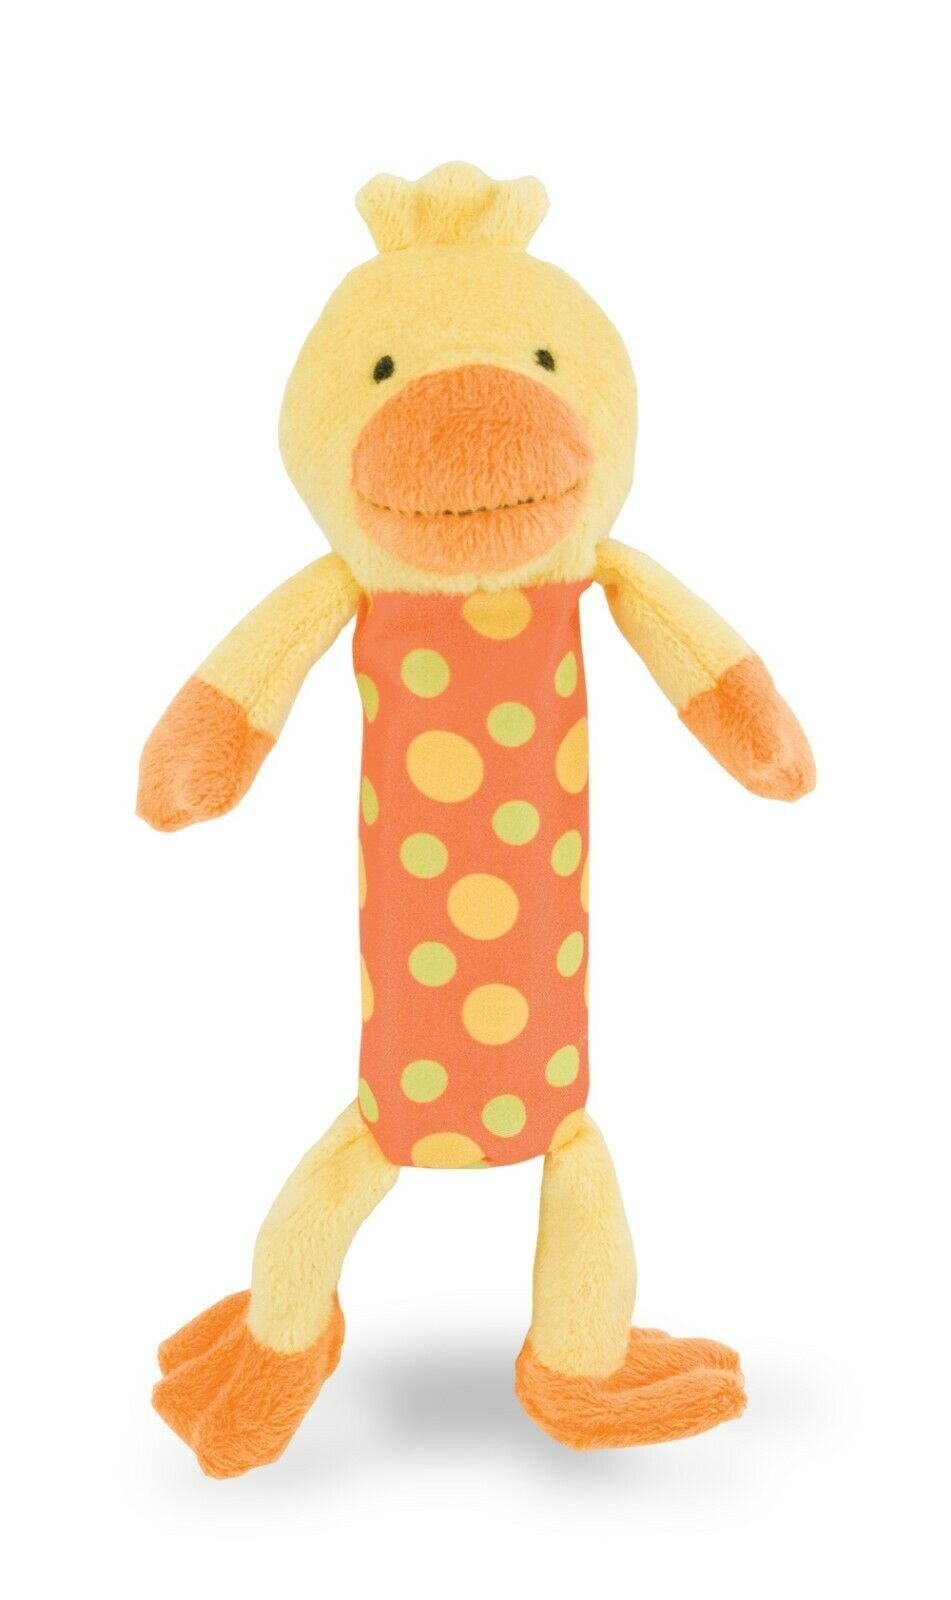 Rich Frog Squeak Easy plush Baby yellow duck baby / small dog toy. New!